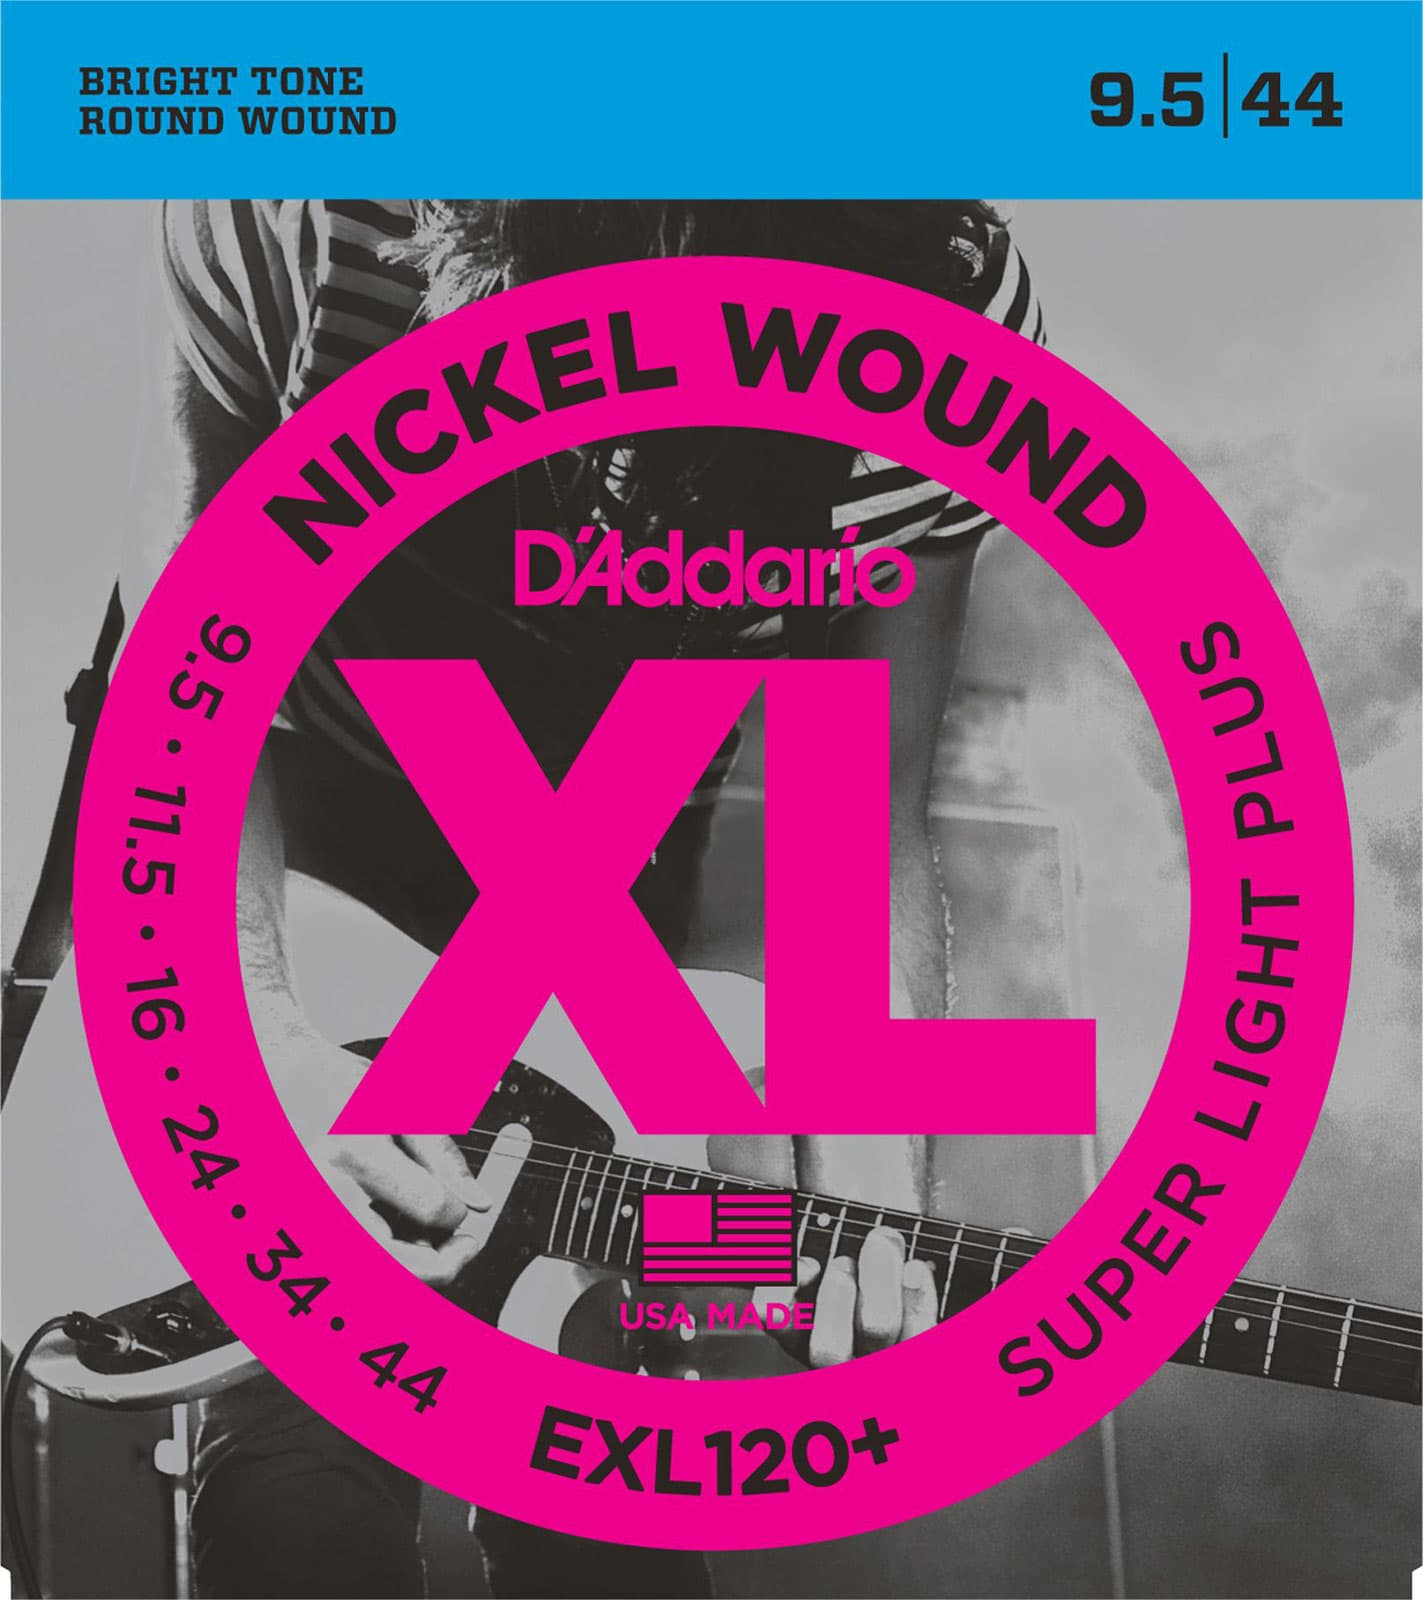 D'ADDARIO AND CO EXL120+ NICKEL WOUND ELECTRIC GUITAR STRINGS SUPER LIGHT PLUS 9.5-44